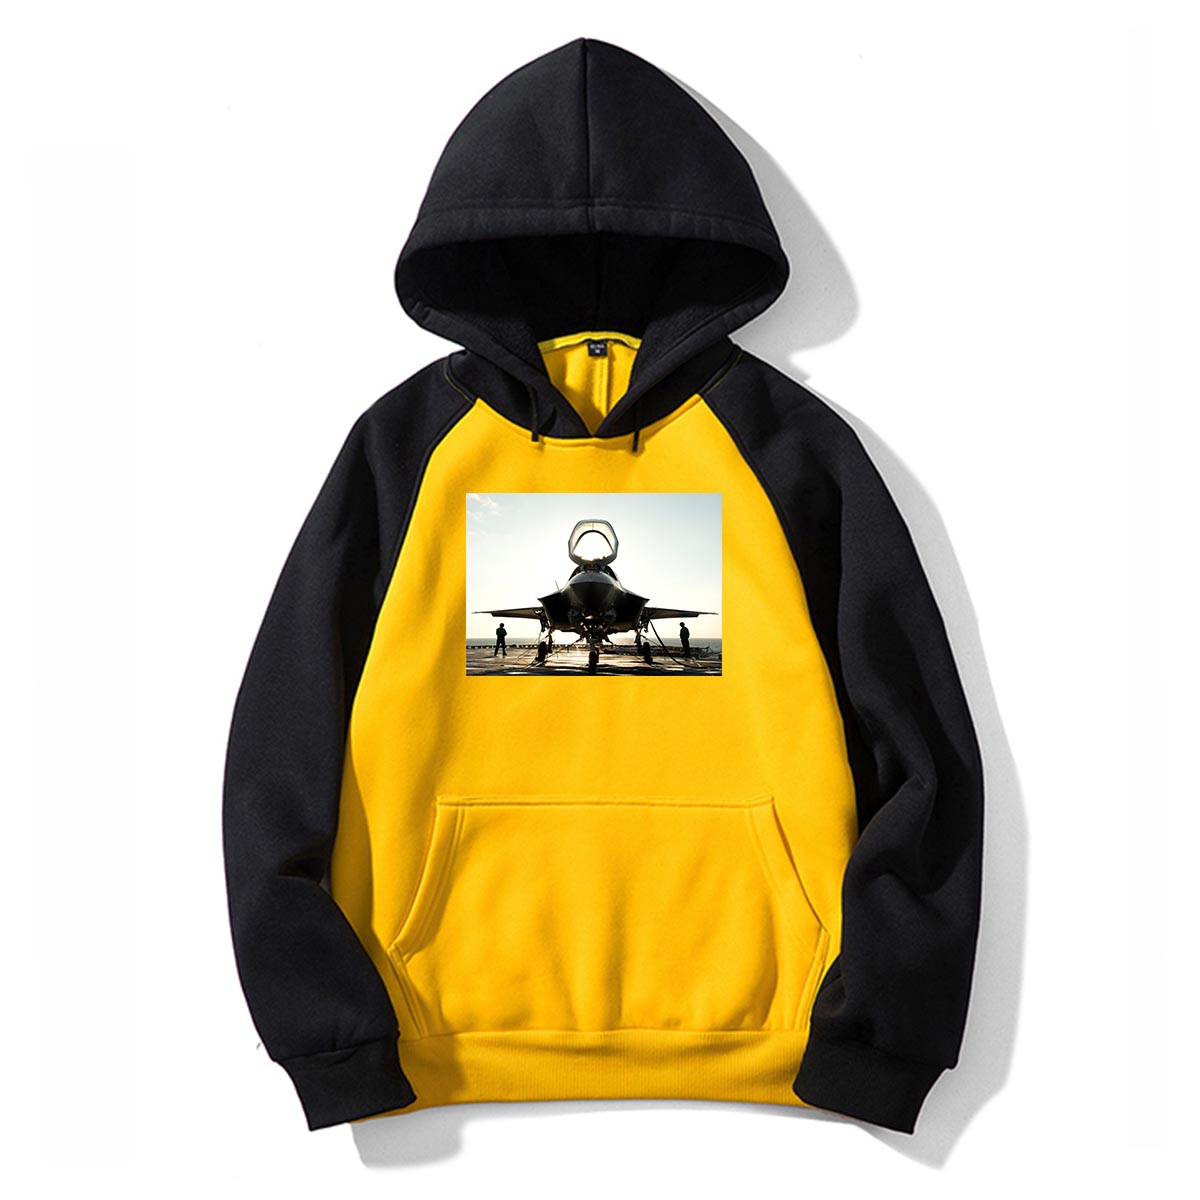 Fighting Falcon F35 Designed Colourful Hoodies